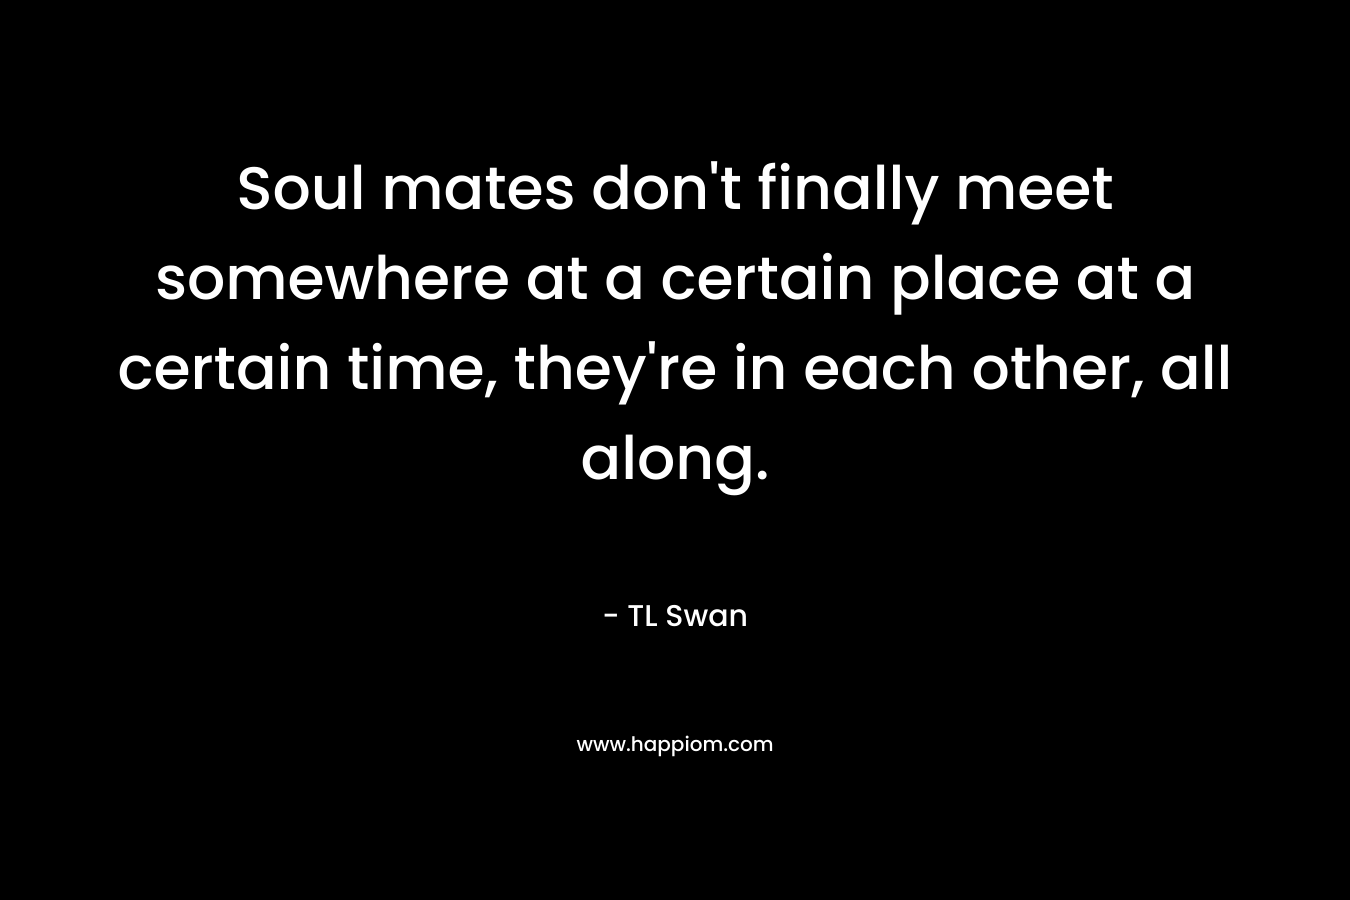 Soul mates don’t finally meet somewhere at a certain place at a certain time, they’re in each other, all along. – TL Swan